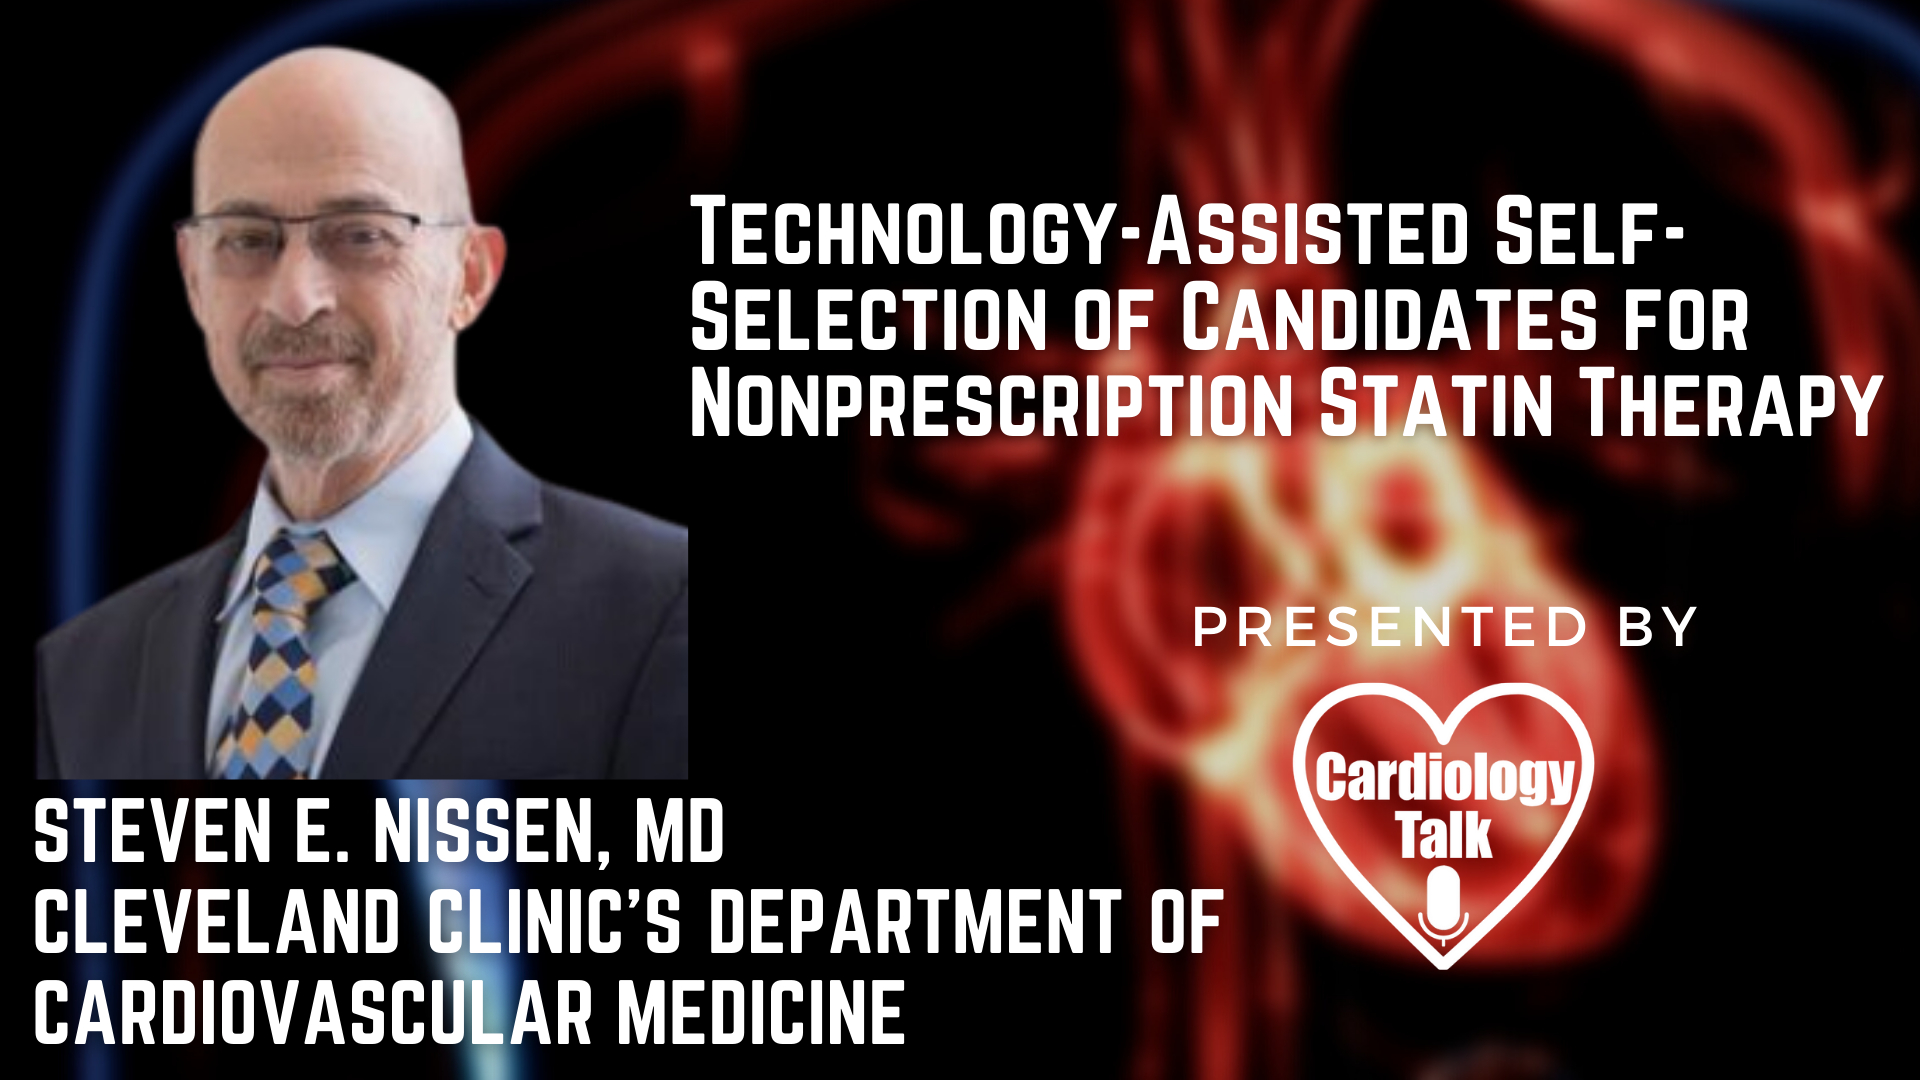 Steven E. Nissen, MD- Technology-Assisted Self-Selection of Candidates for Nonprescription Statin Therapy